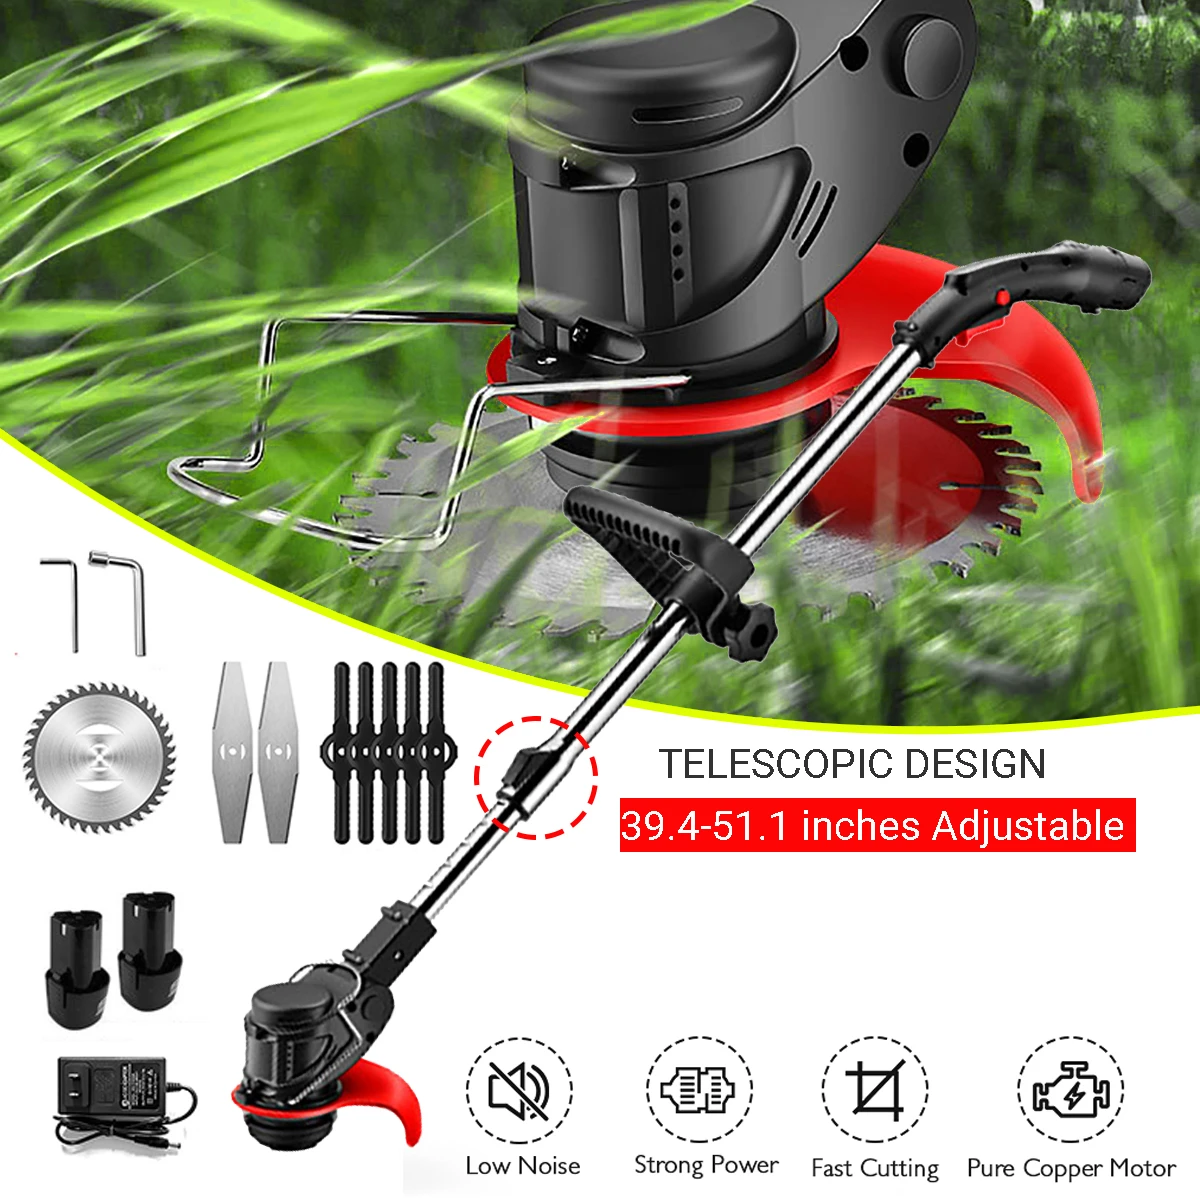 Portable Electric Grass Trimmer Handheld Lawn Mower Agricultural Household Cordless Weeder Garden Pruning Tool